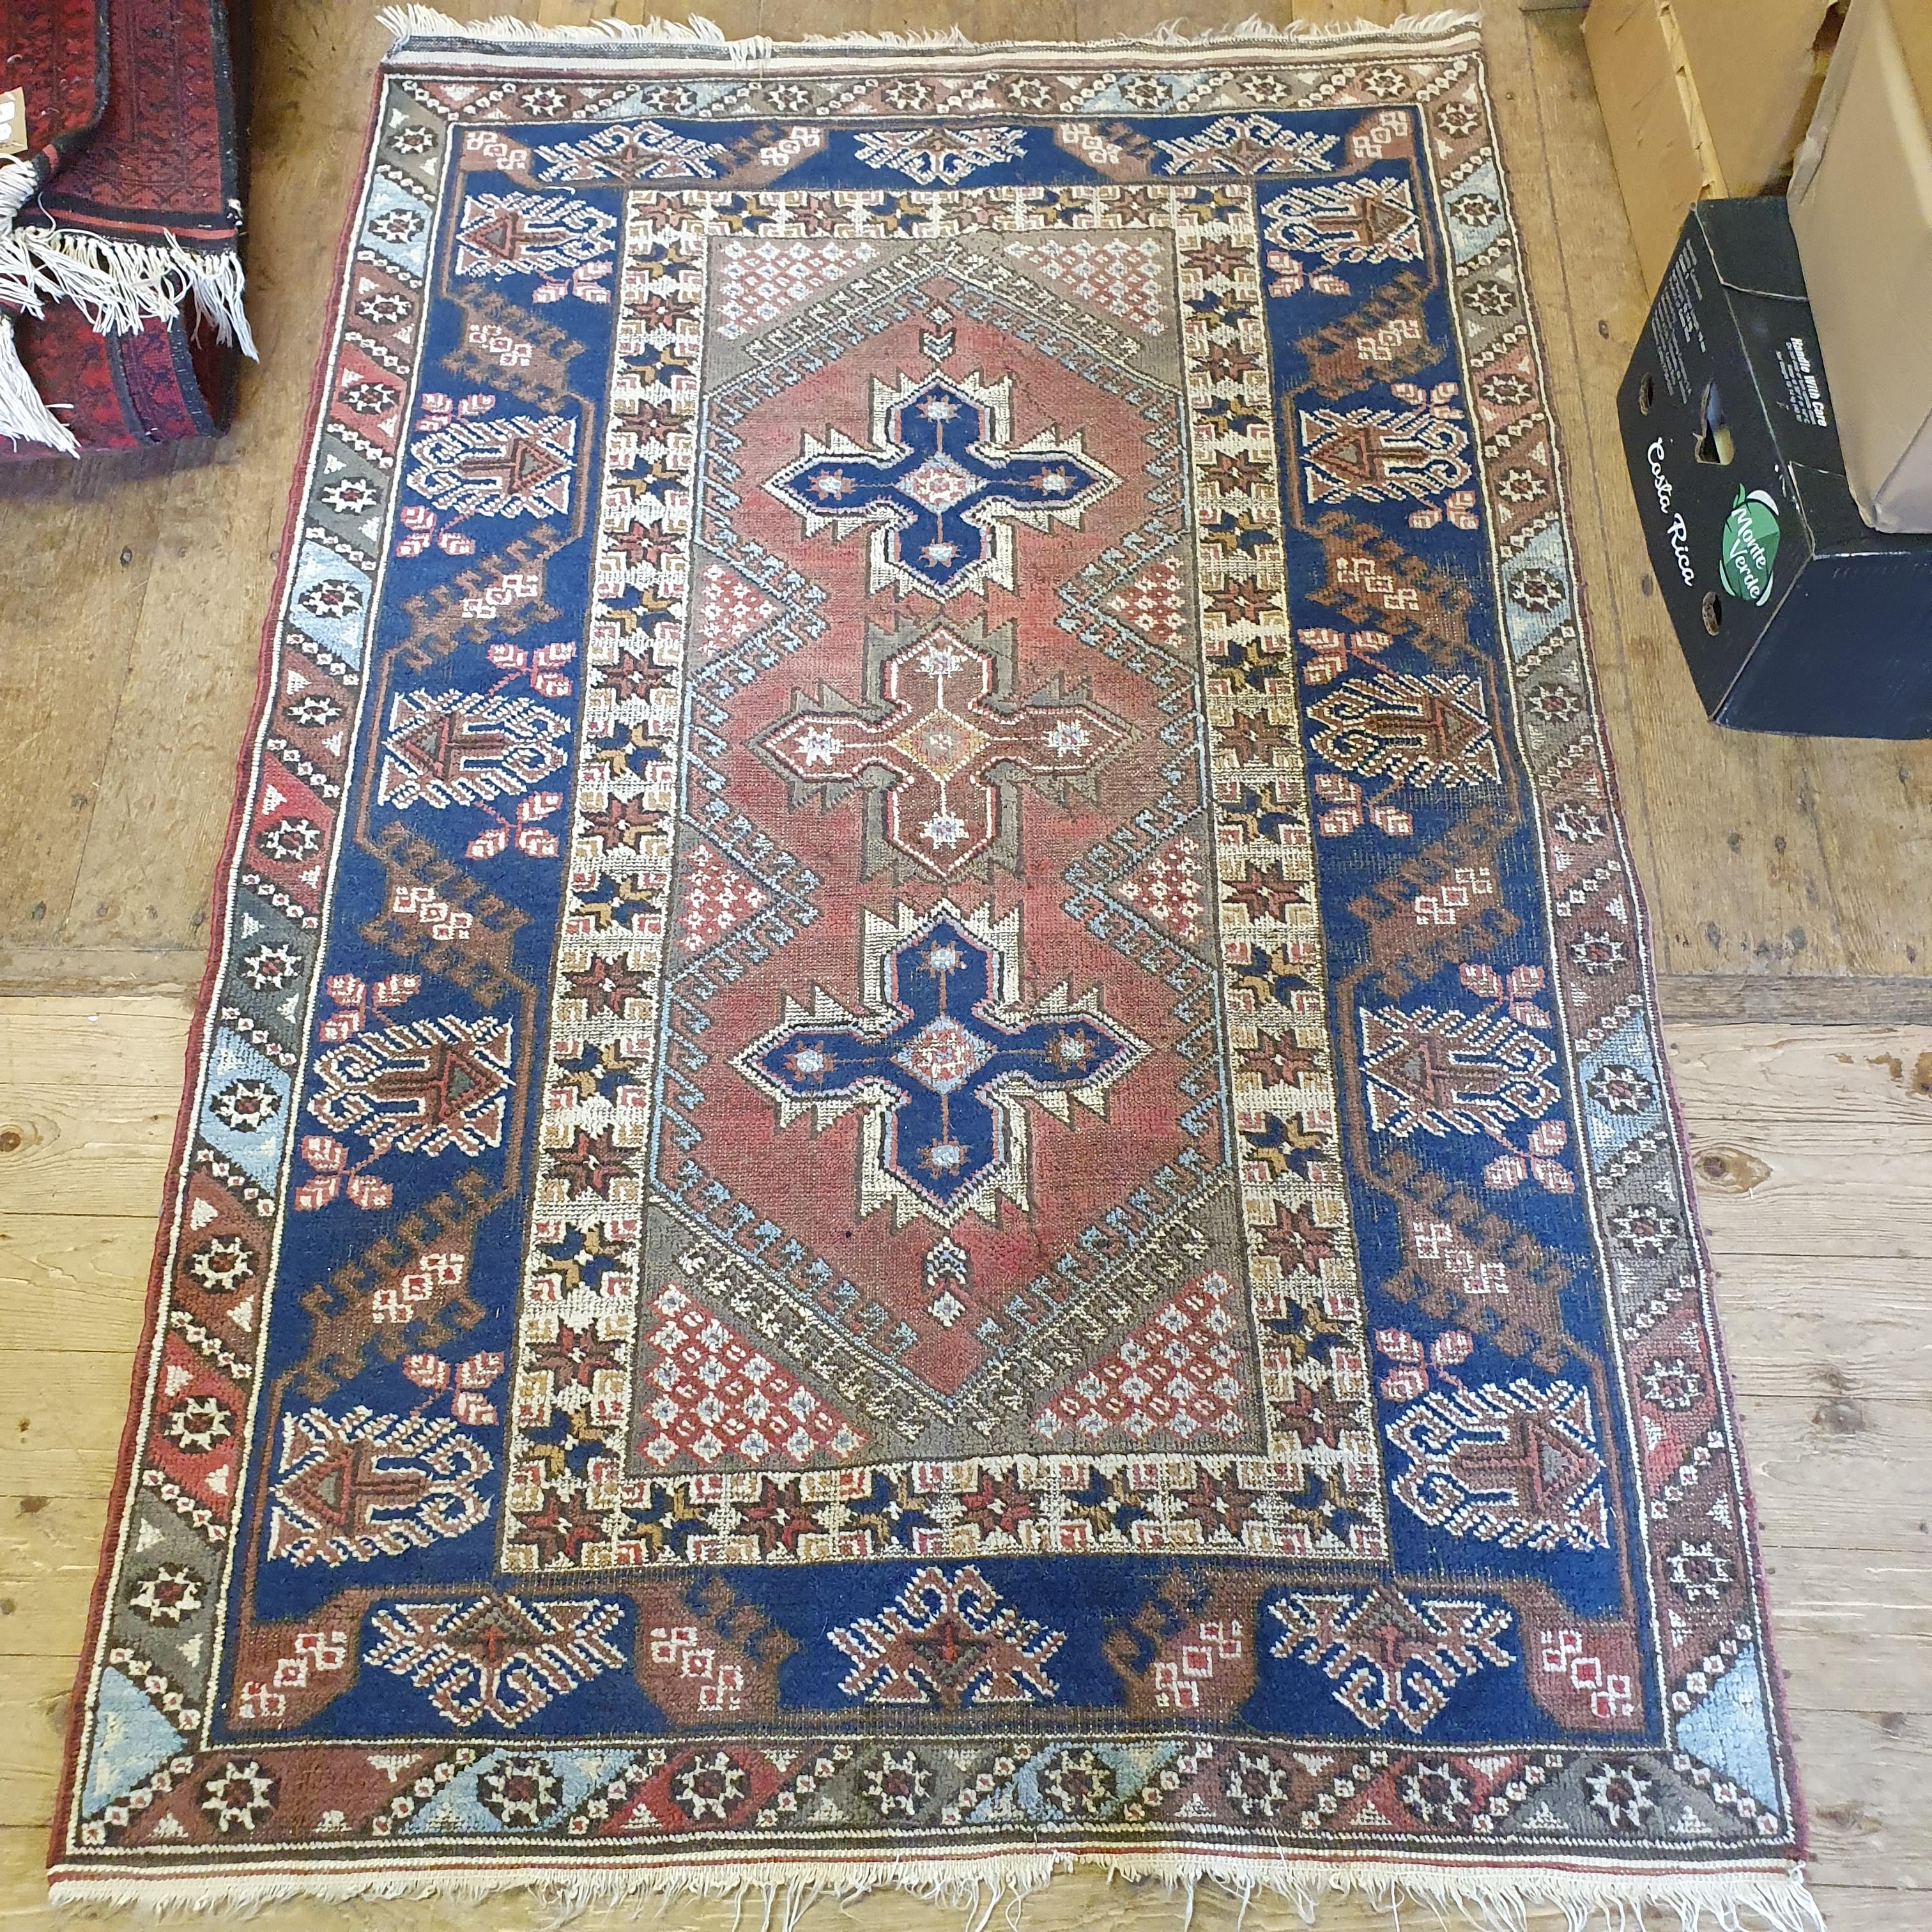 A Persian red ground rug, main blue boarder, the centre with three geometric medallions, 187 x 124